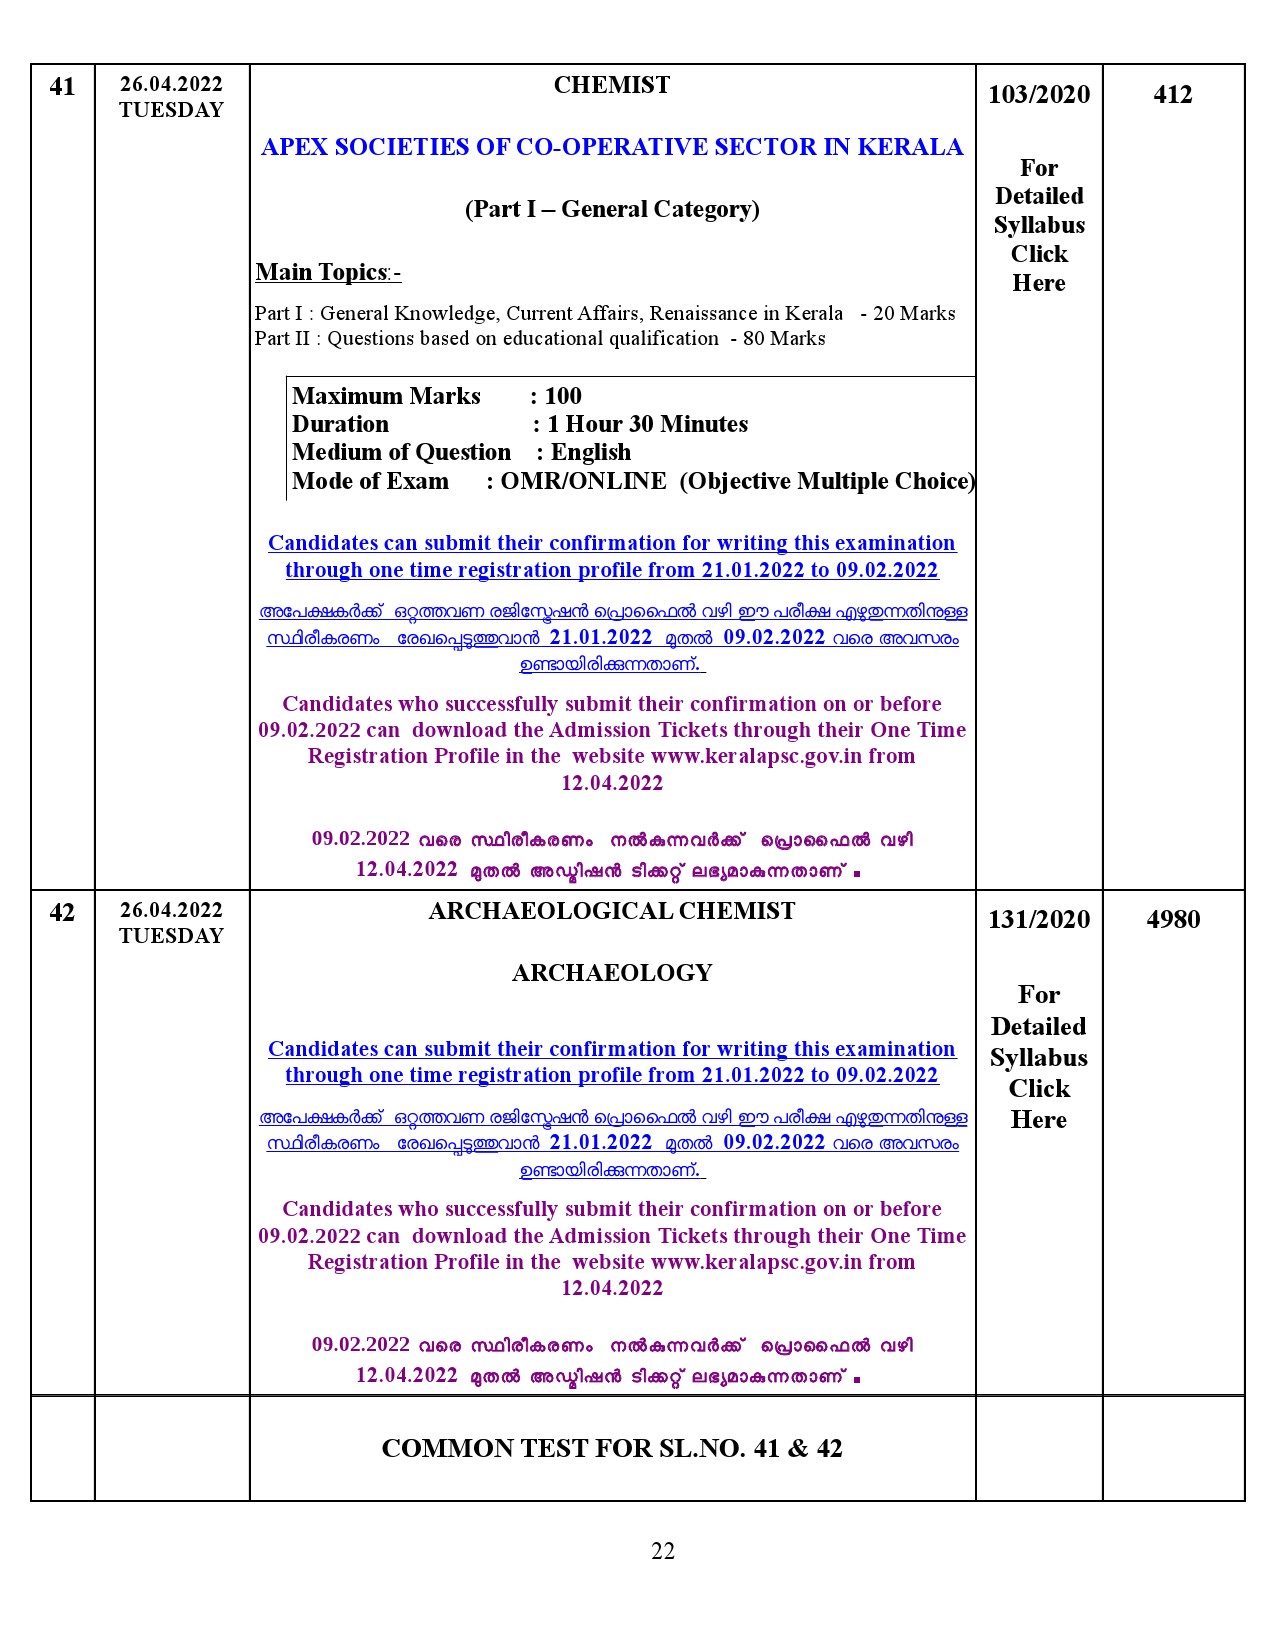 Examination Programme For The Month Of April 2022 - Notification Image 22